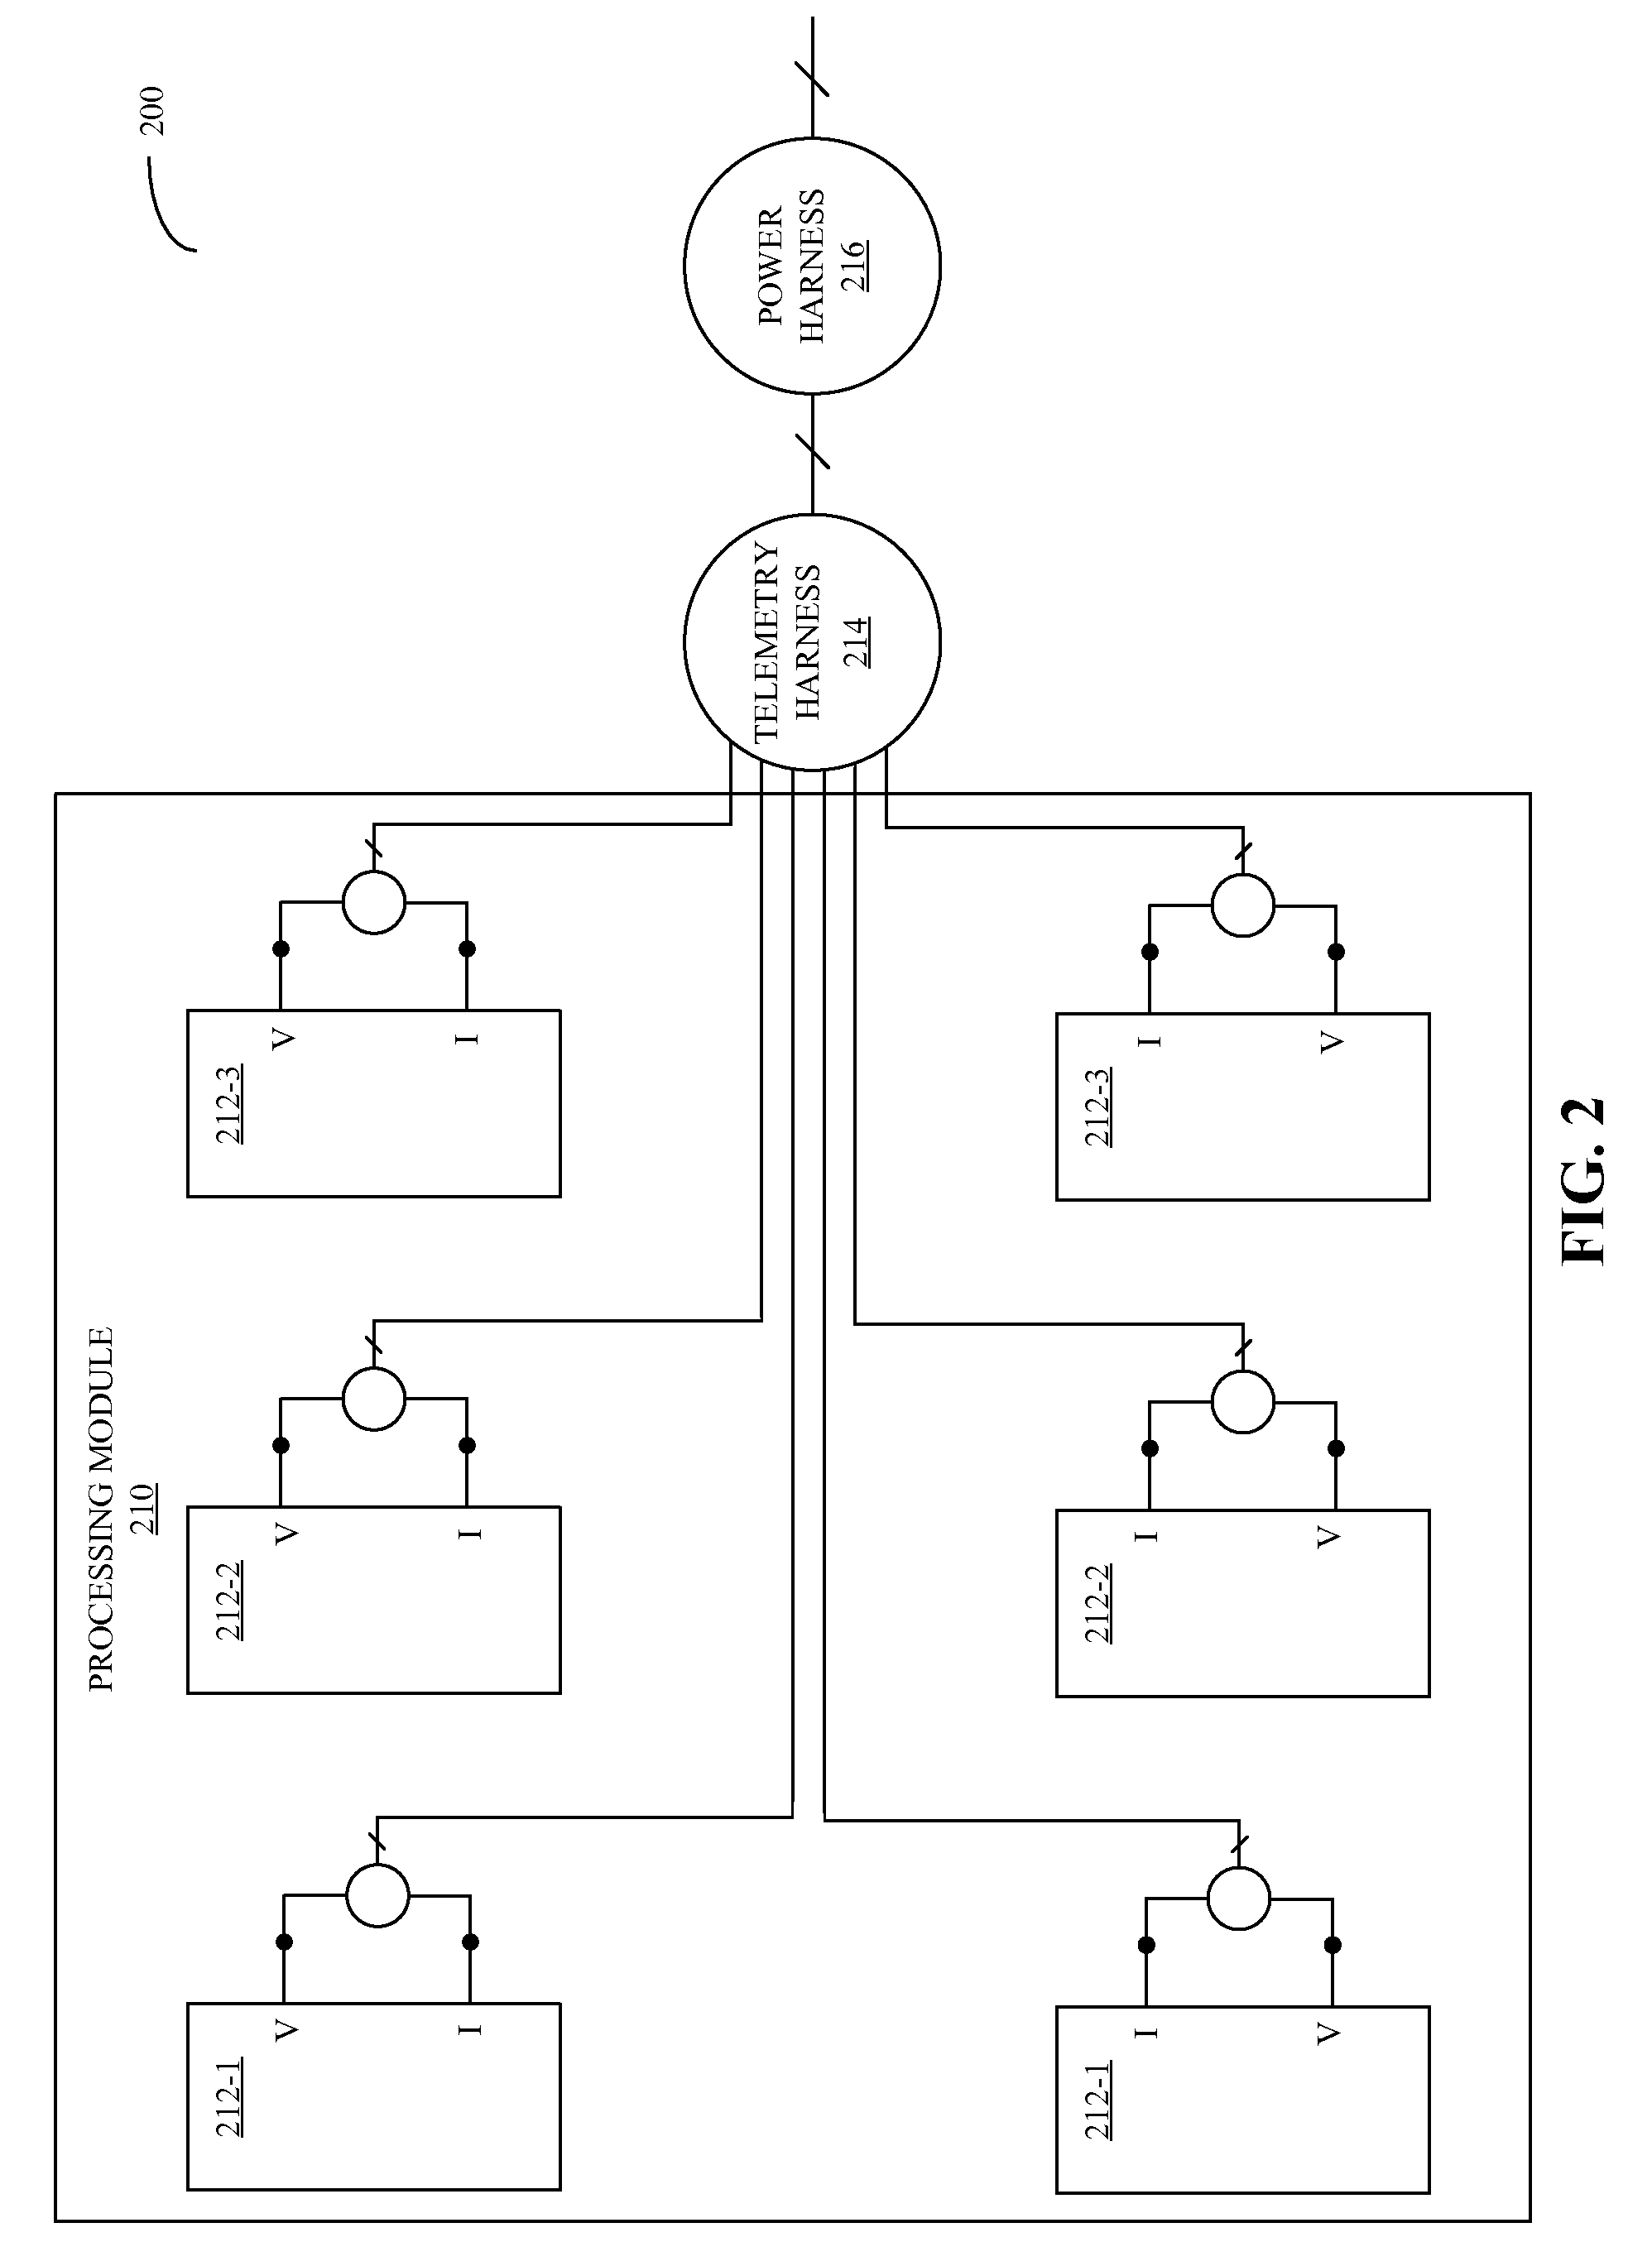 Temperature-aware and energy-aware scheduling in a computer system